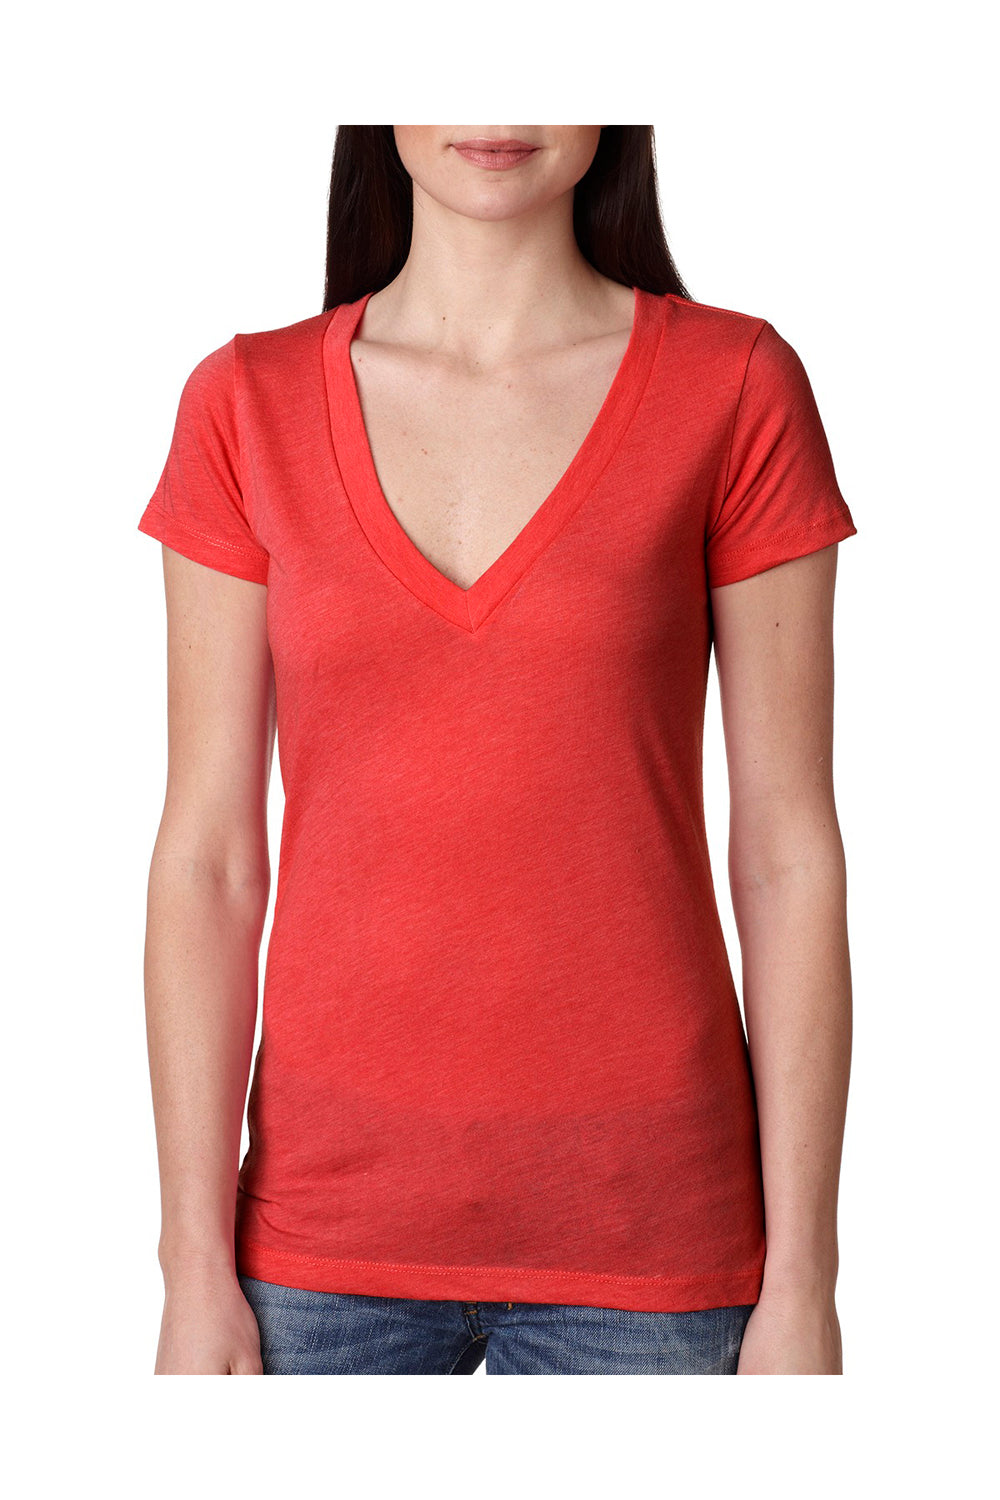 Next Level 6740 Womens Jersey Short Sleeve V-Neck T-Shirt Red Front